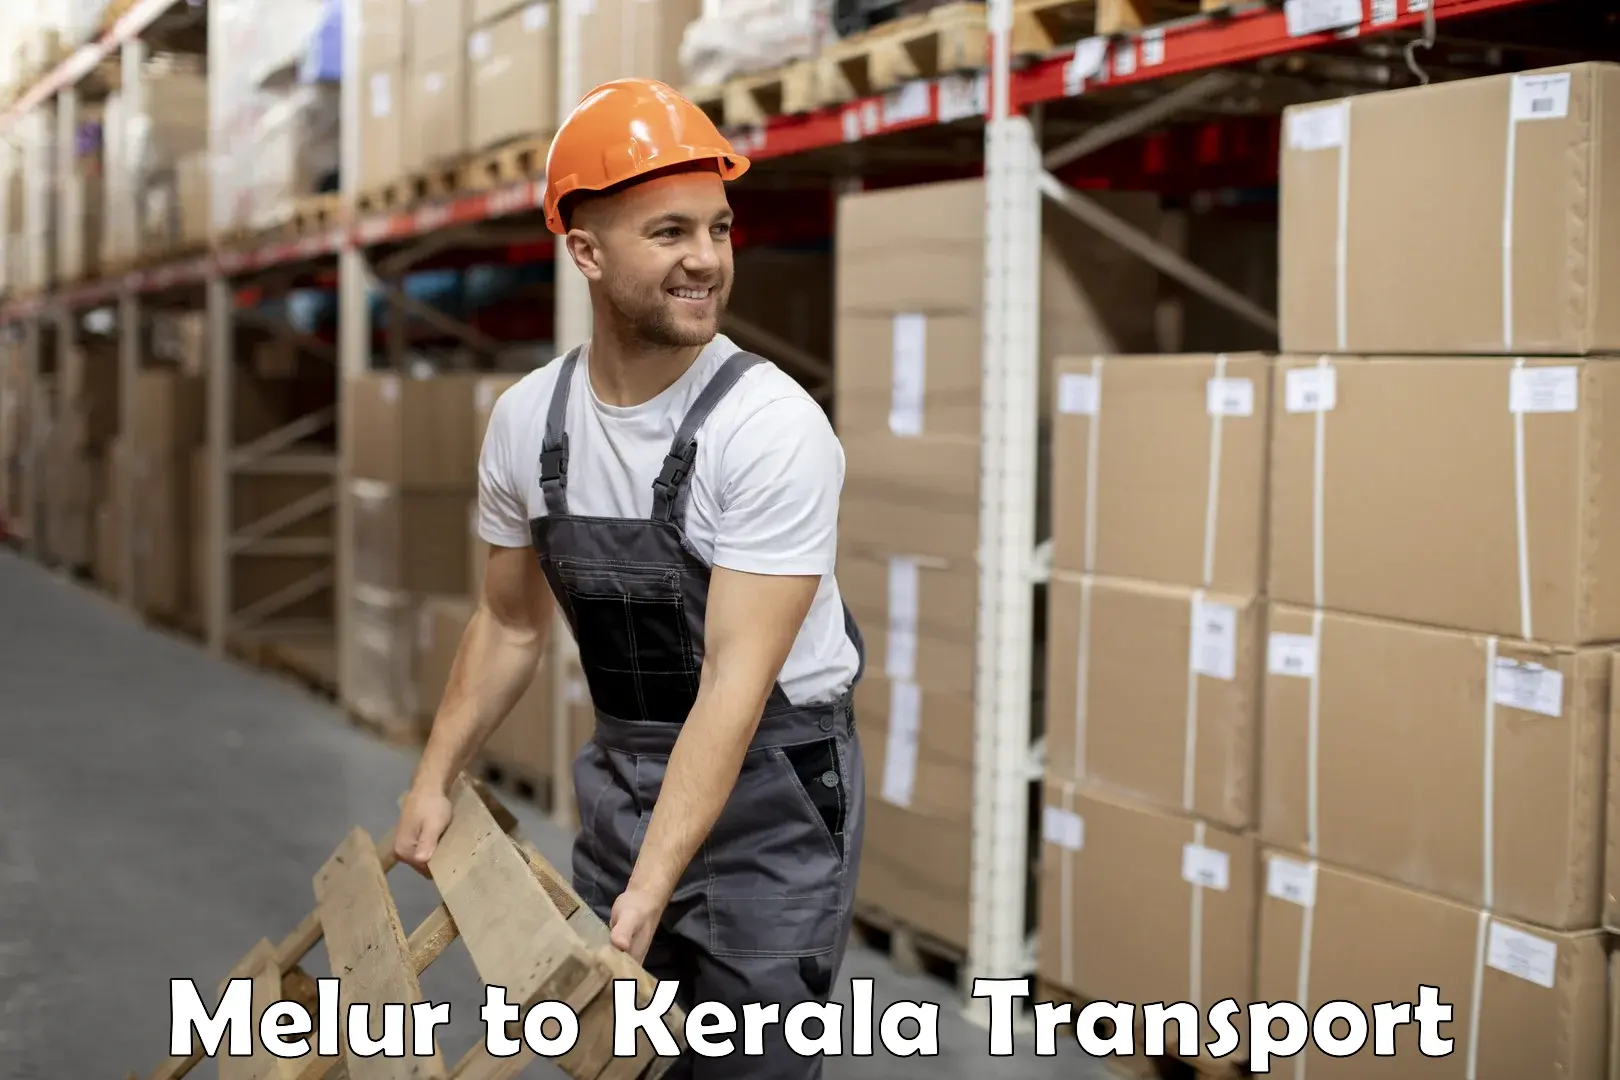 Part load transport service in India Melur to Cochin Port Kochi